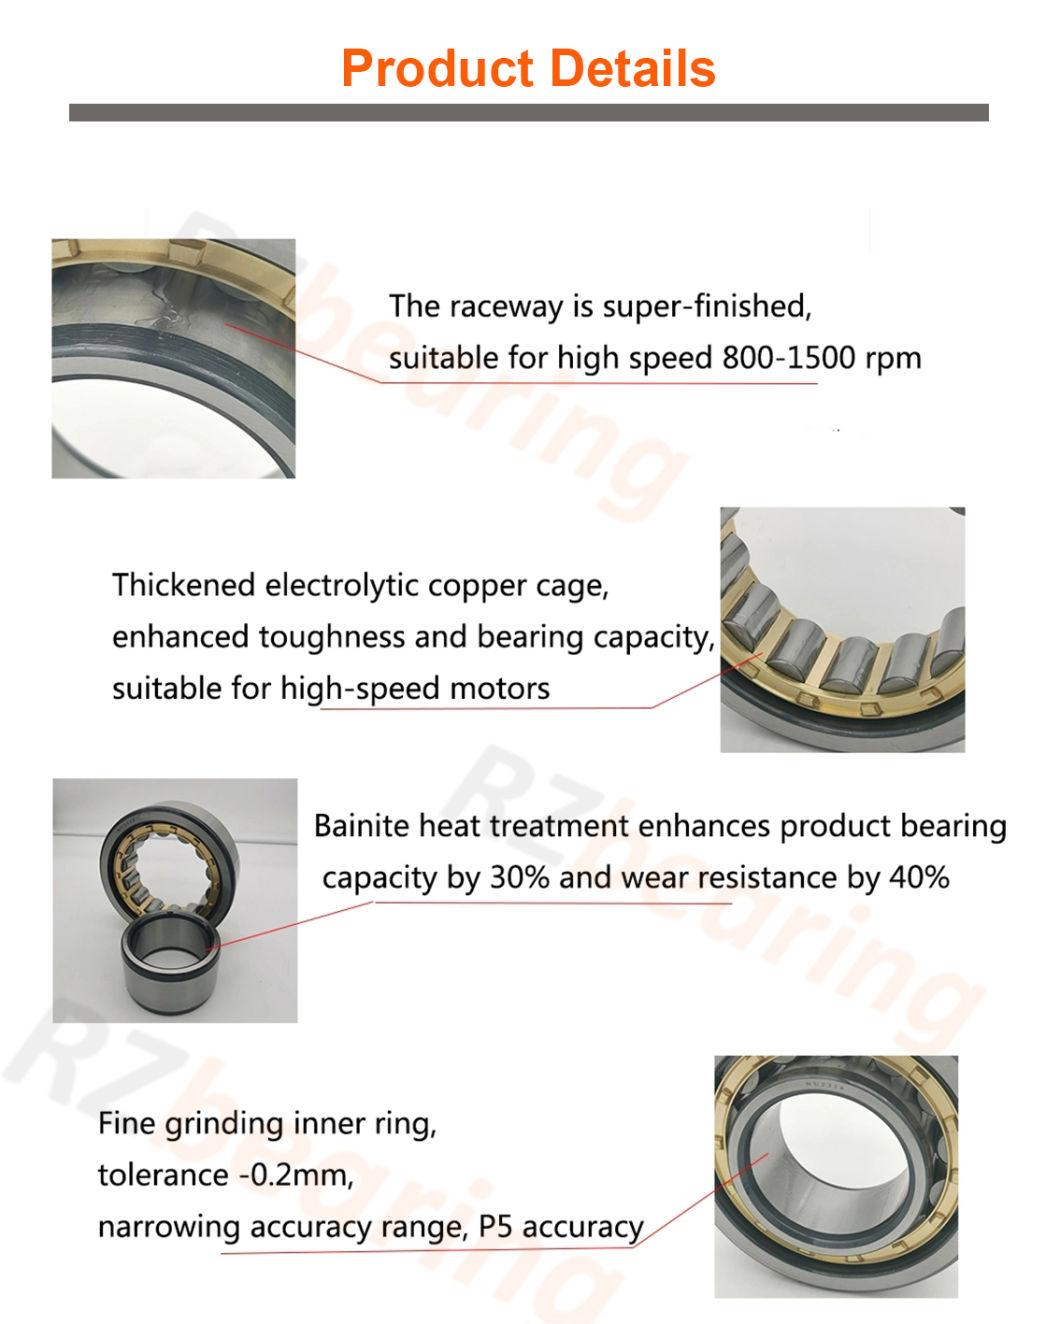 Bearings Pillow Block Bearings High Speed Cylindrical Roller Bearing Nu2205 with Large Stock